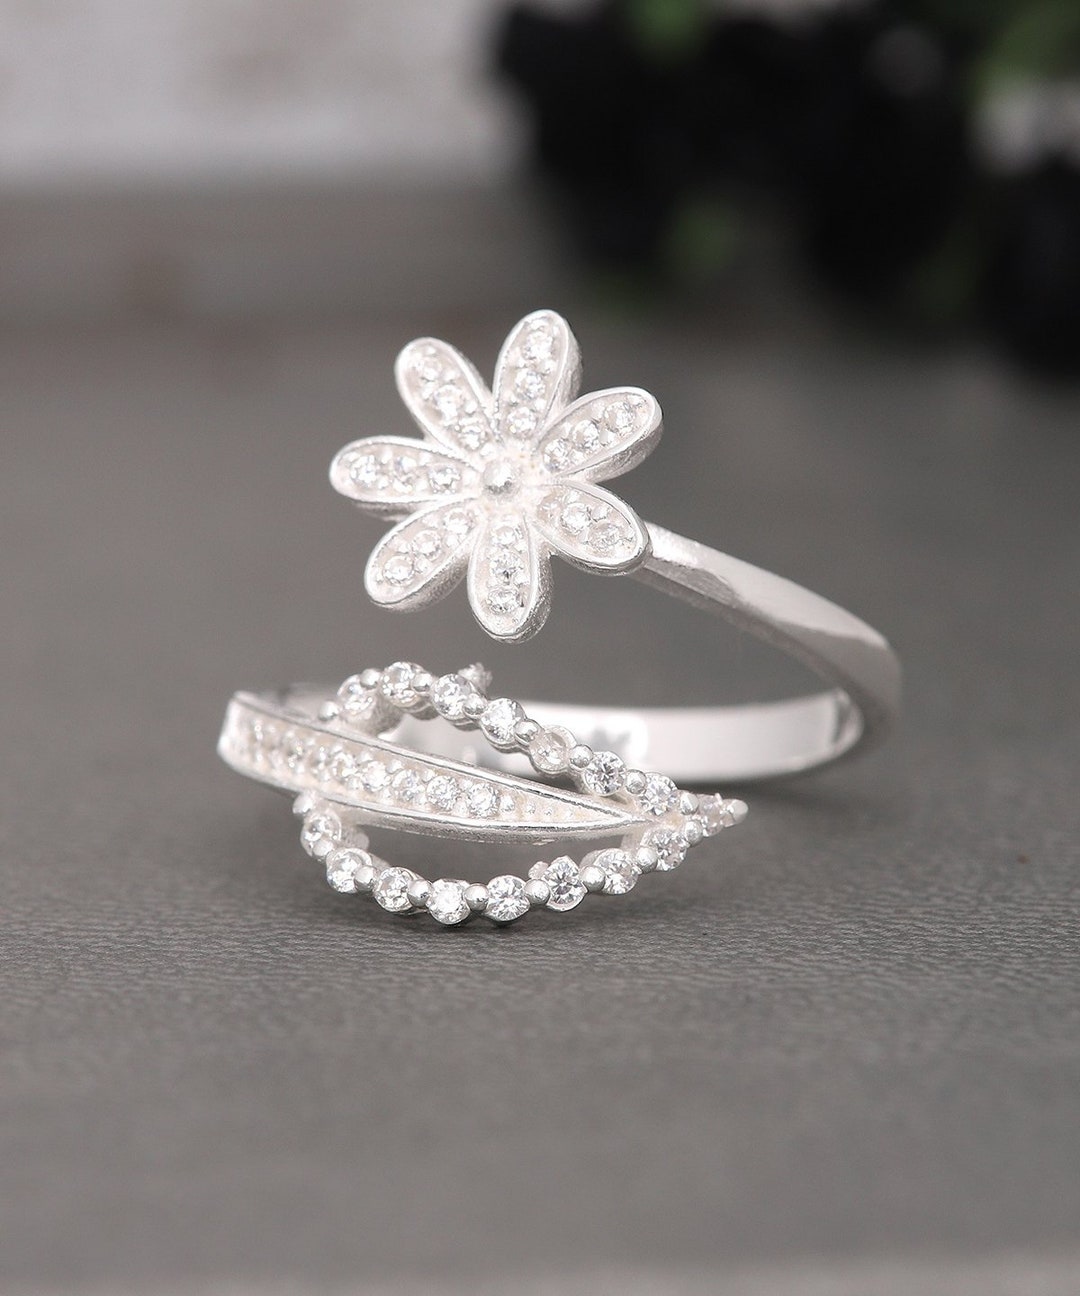 Zircon & 925 Sterling Silver Free Size Adjustable Flower Ring, Dainty Ring, Silver  Ring, Unique Gift Ring - Etsy | Silberringe